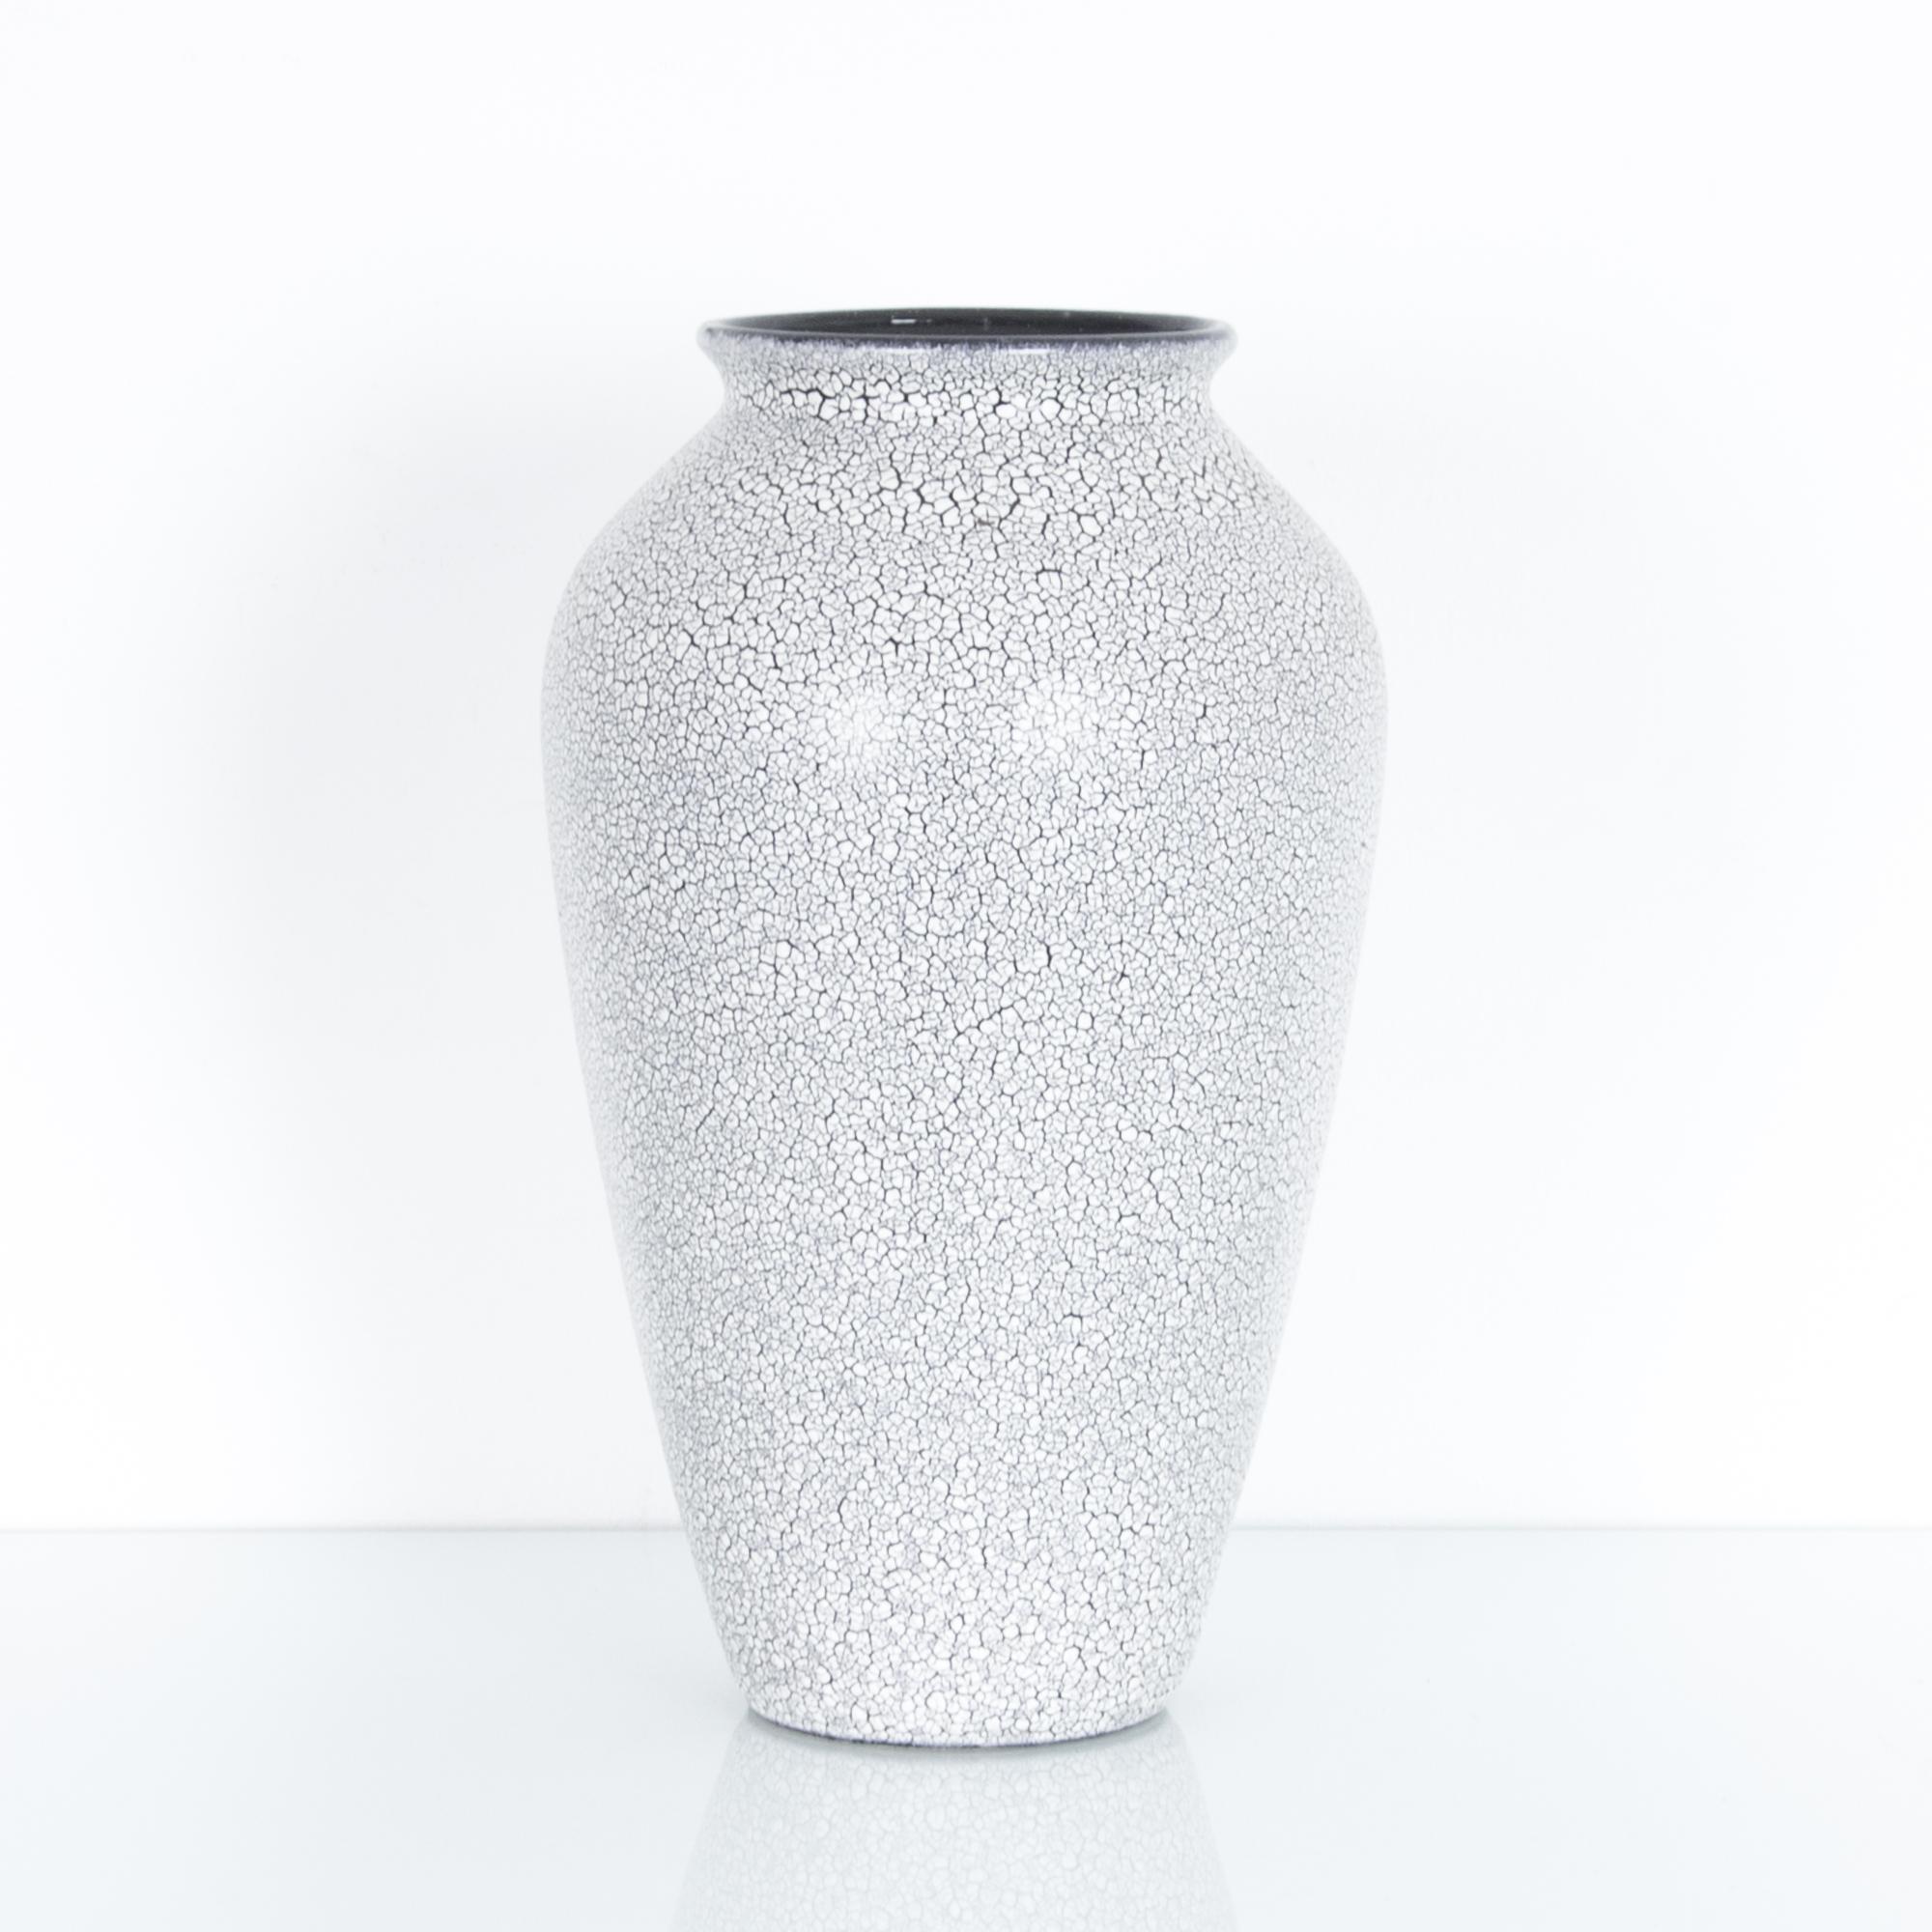 Striking and subtle, this black and white vase comes from Germany circa 1940, embellished with a minute texture, a crackled white glaze on a black under layer. These characteristic mid-20th century ceramics were produced in West Germany, featuring